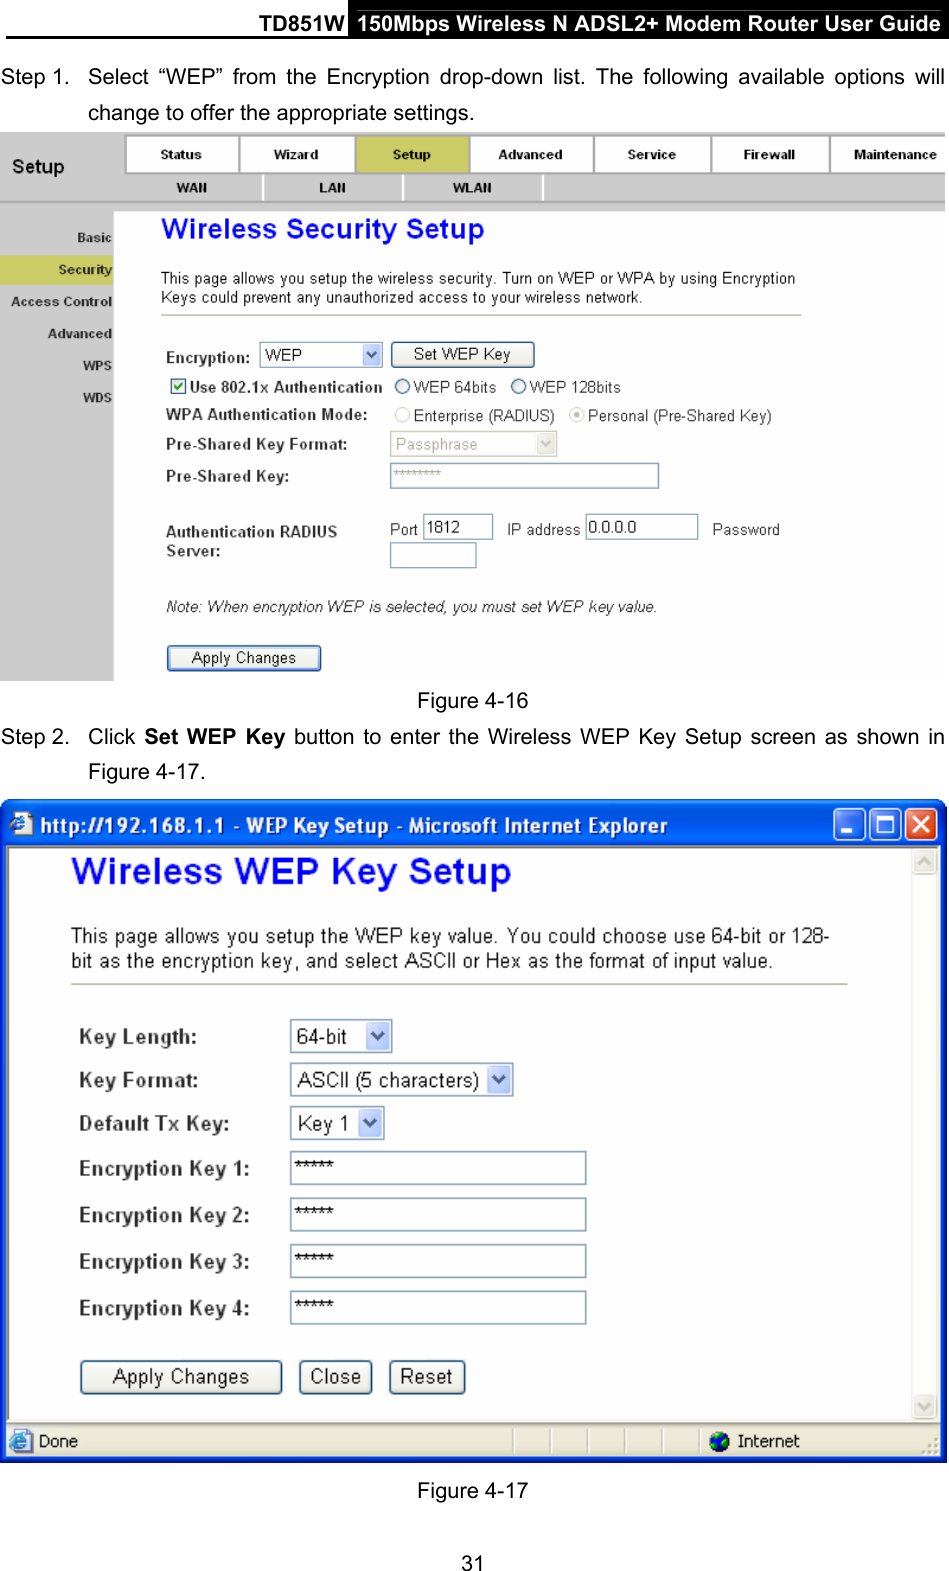 TD851W  150Mbps Wireless N ADSL2+ Modem Router User Guide Step 1.  Select “WEP” from the Encryption drop-down list. The following available options will change to offer the appropriate settings.    Figure 4-16 Step 2.  Click Set WEP Key button to enter the Wireless WEP Key Setup screen as shown in Figure 4-17.    Figure 4-17 31 